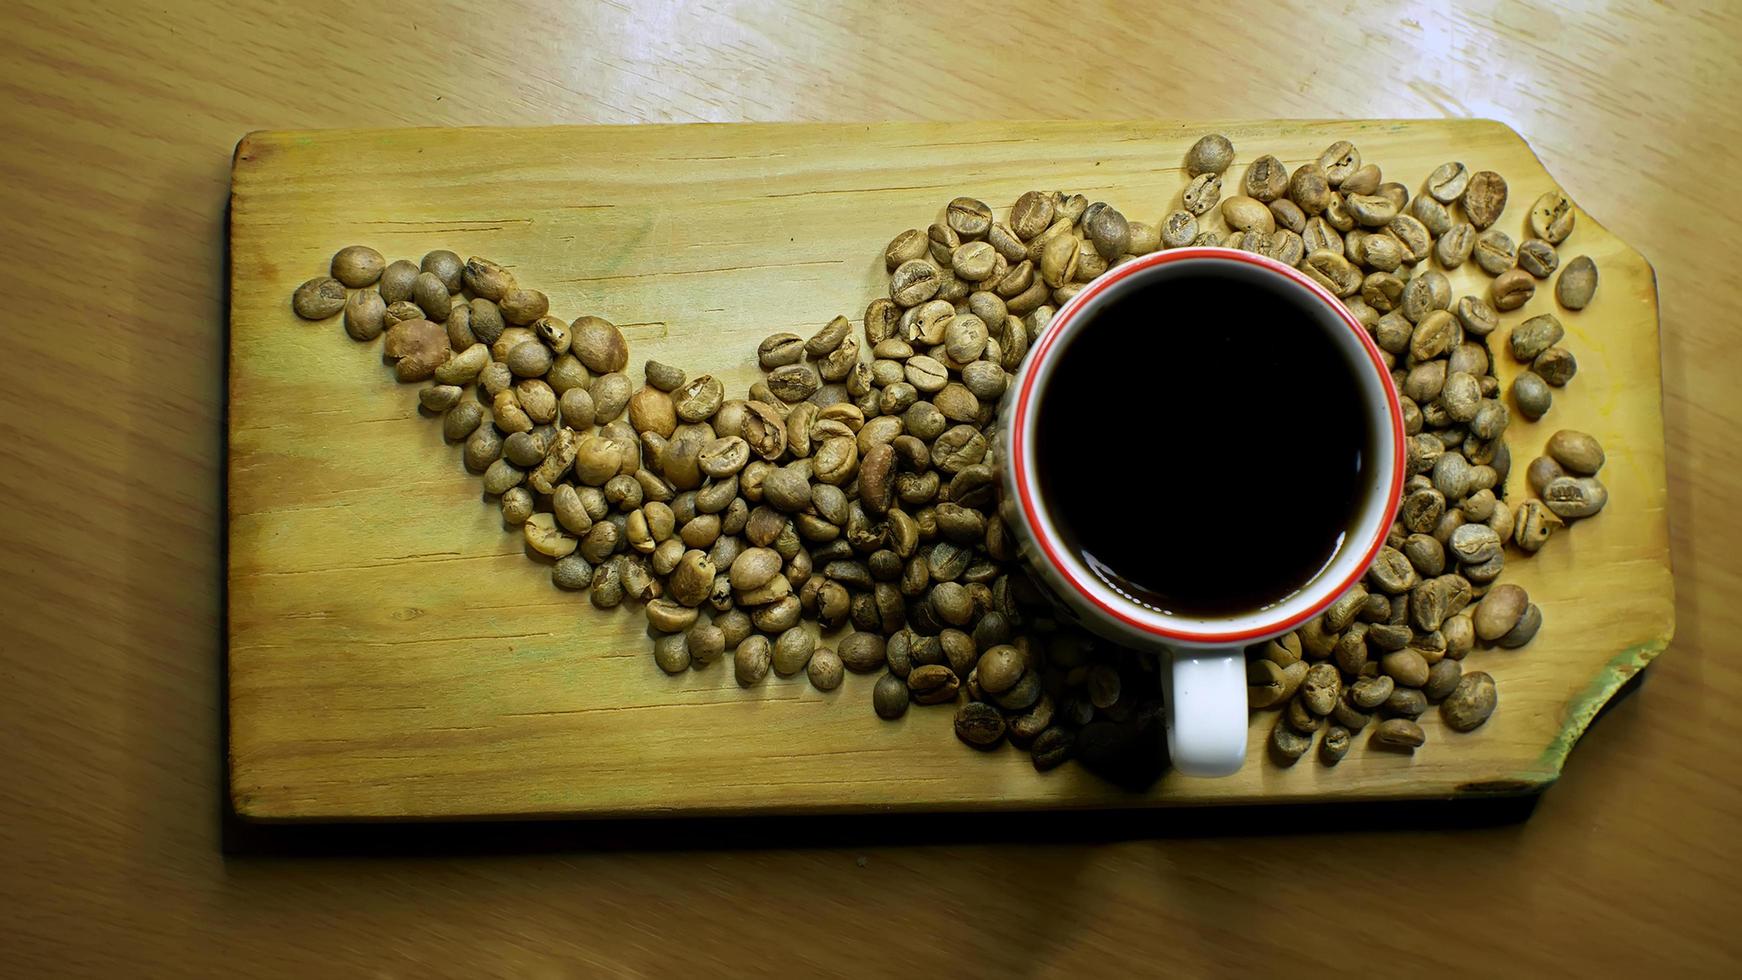 Original Indonesian Arabica coffee beans immortalized in a traditional style in jpg format photo